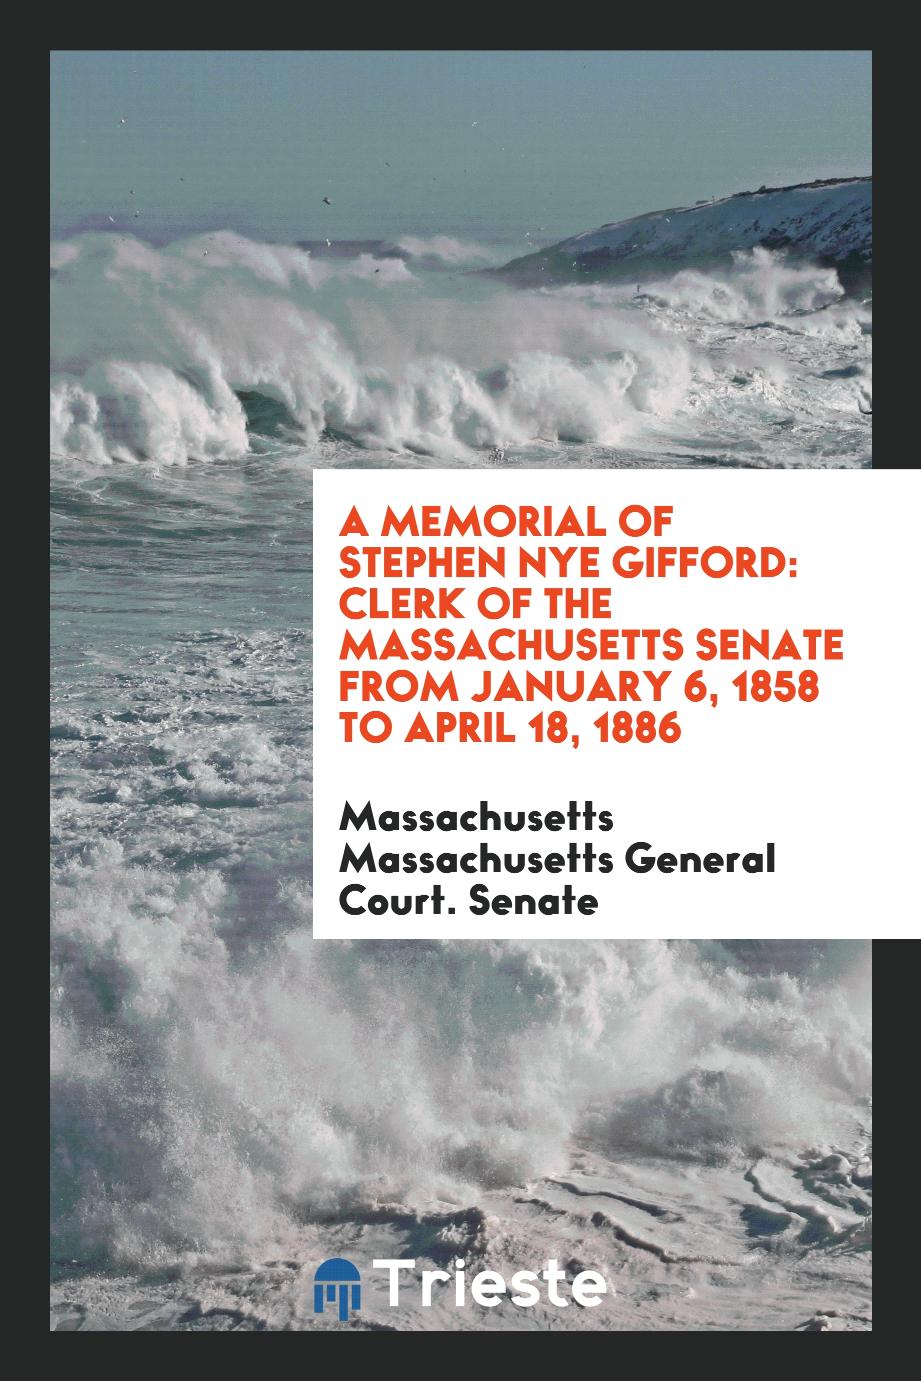 A Memorial of Stephen Nye Gifford: Clerk of the Massachusetts Senate from January 6, 1858 to April 18, 1886